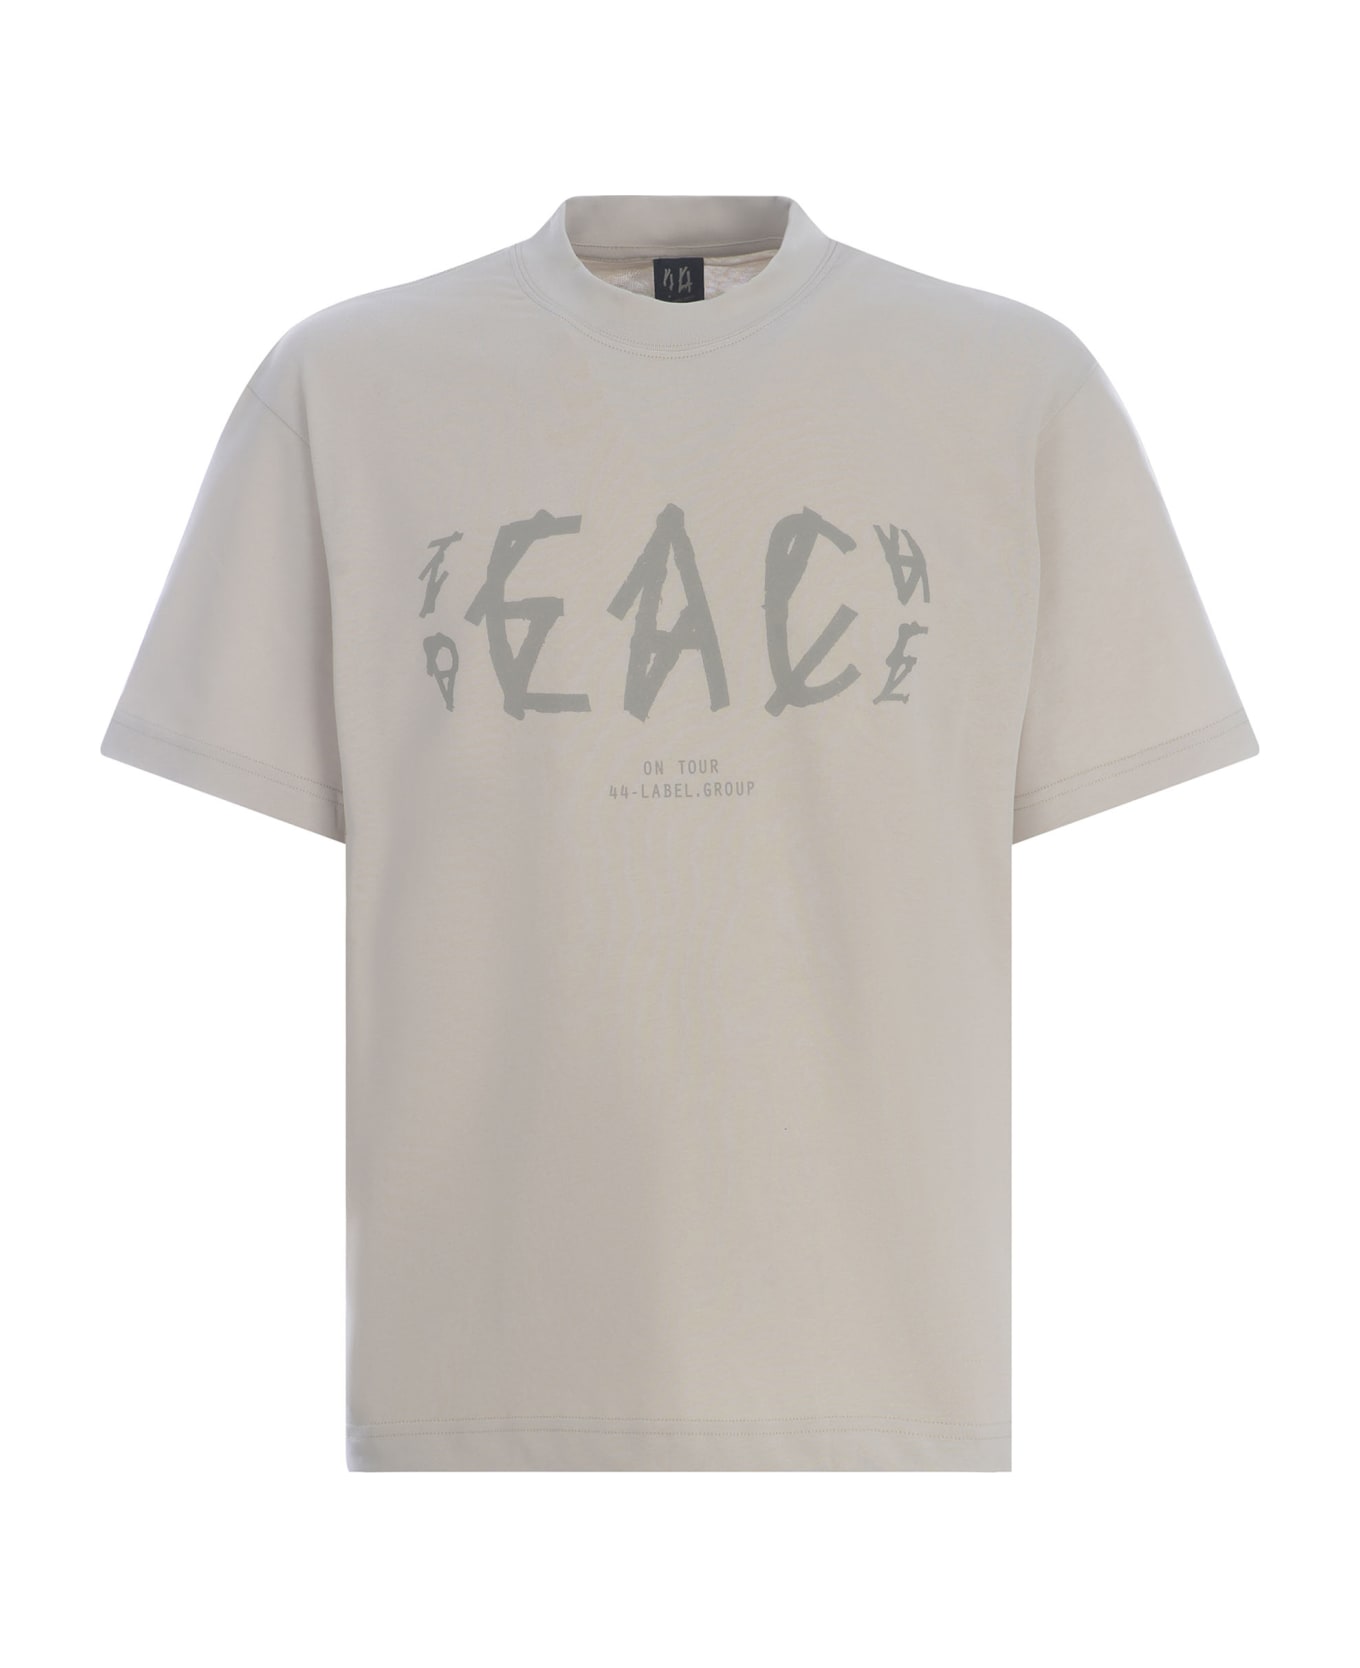 44 Label Group T-shirt 44 Label Group "peace" Made Of Cotton - Crema